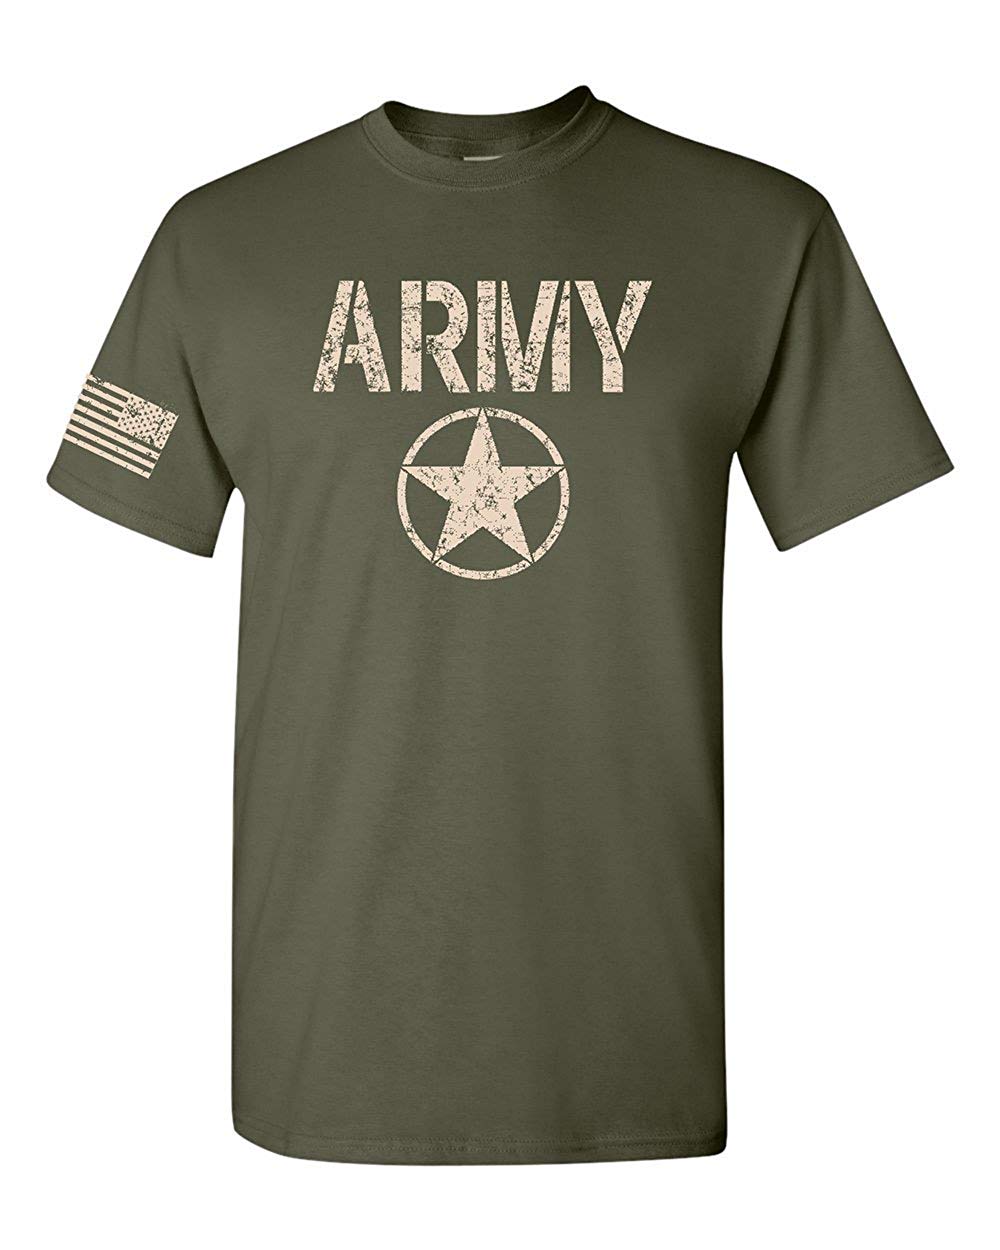 All-Star Clothing and Apparel Logo - All Things Apparel US Army Star With Flag On The Sleeve